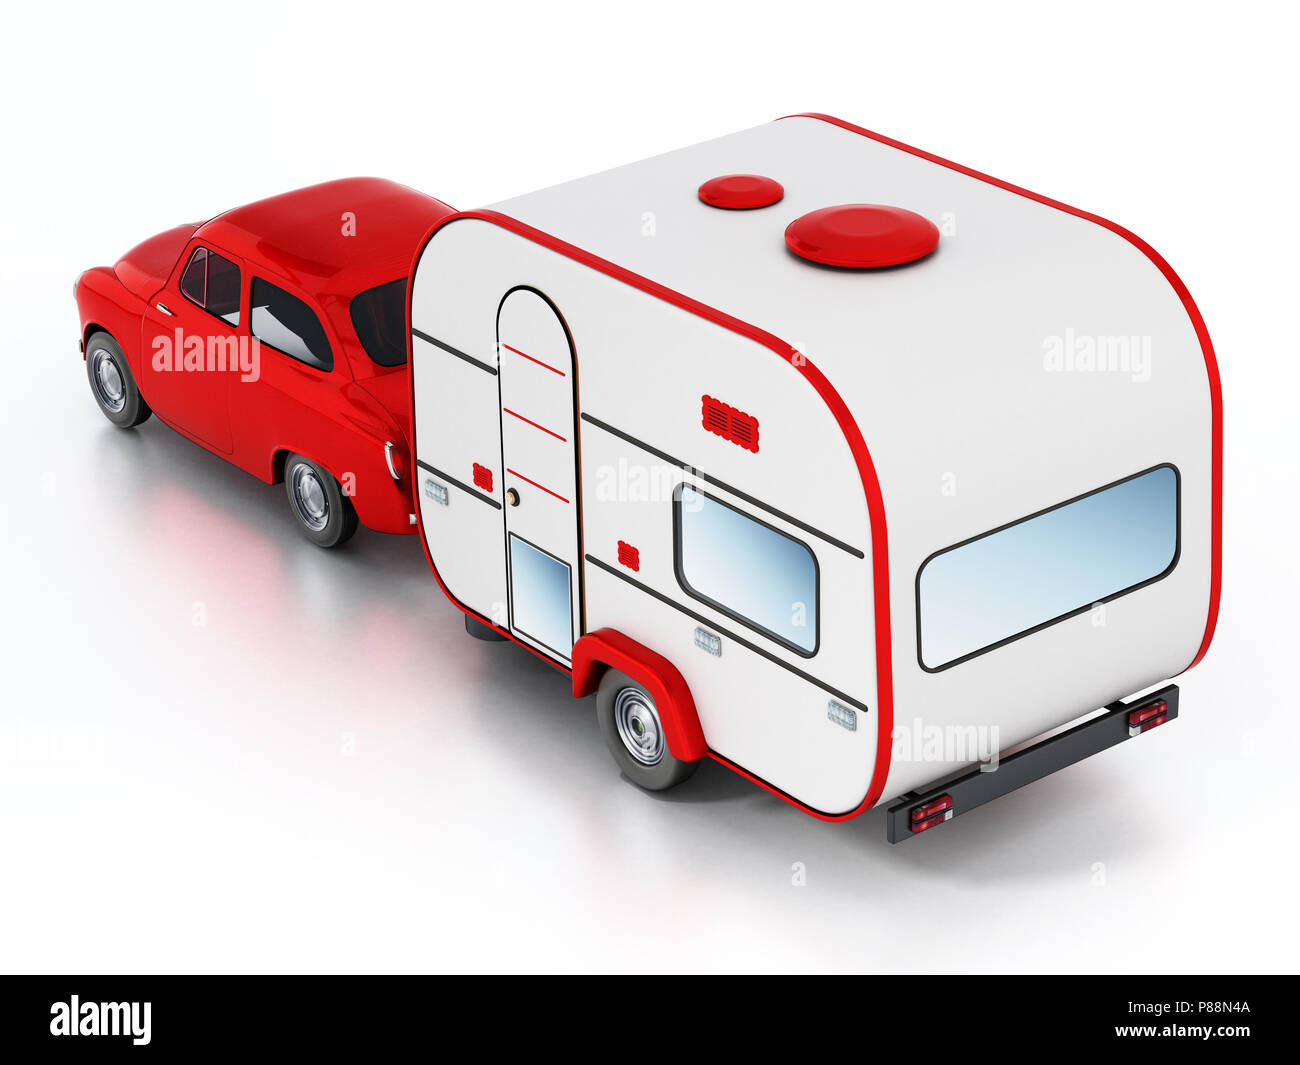 Red vintage car with caravan. Isolated on white background. 3D illustration. Stock Photo